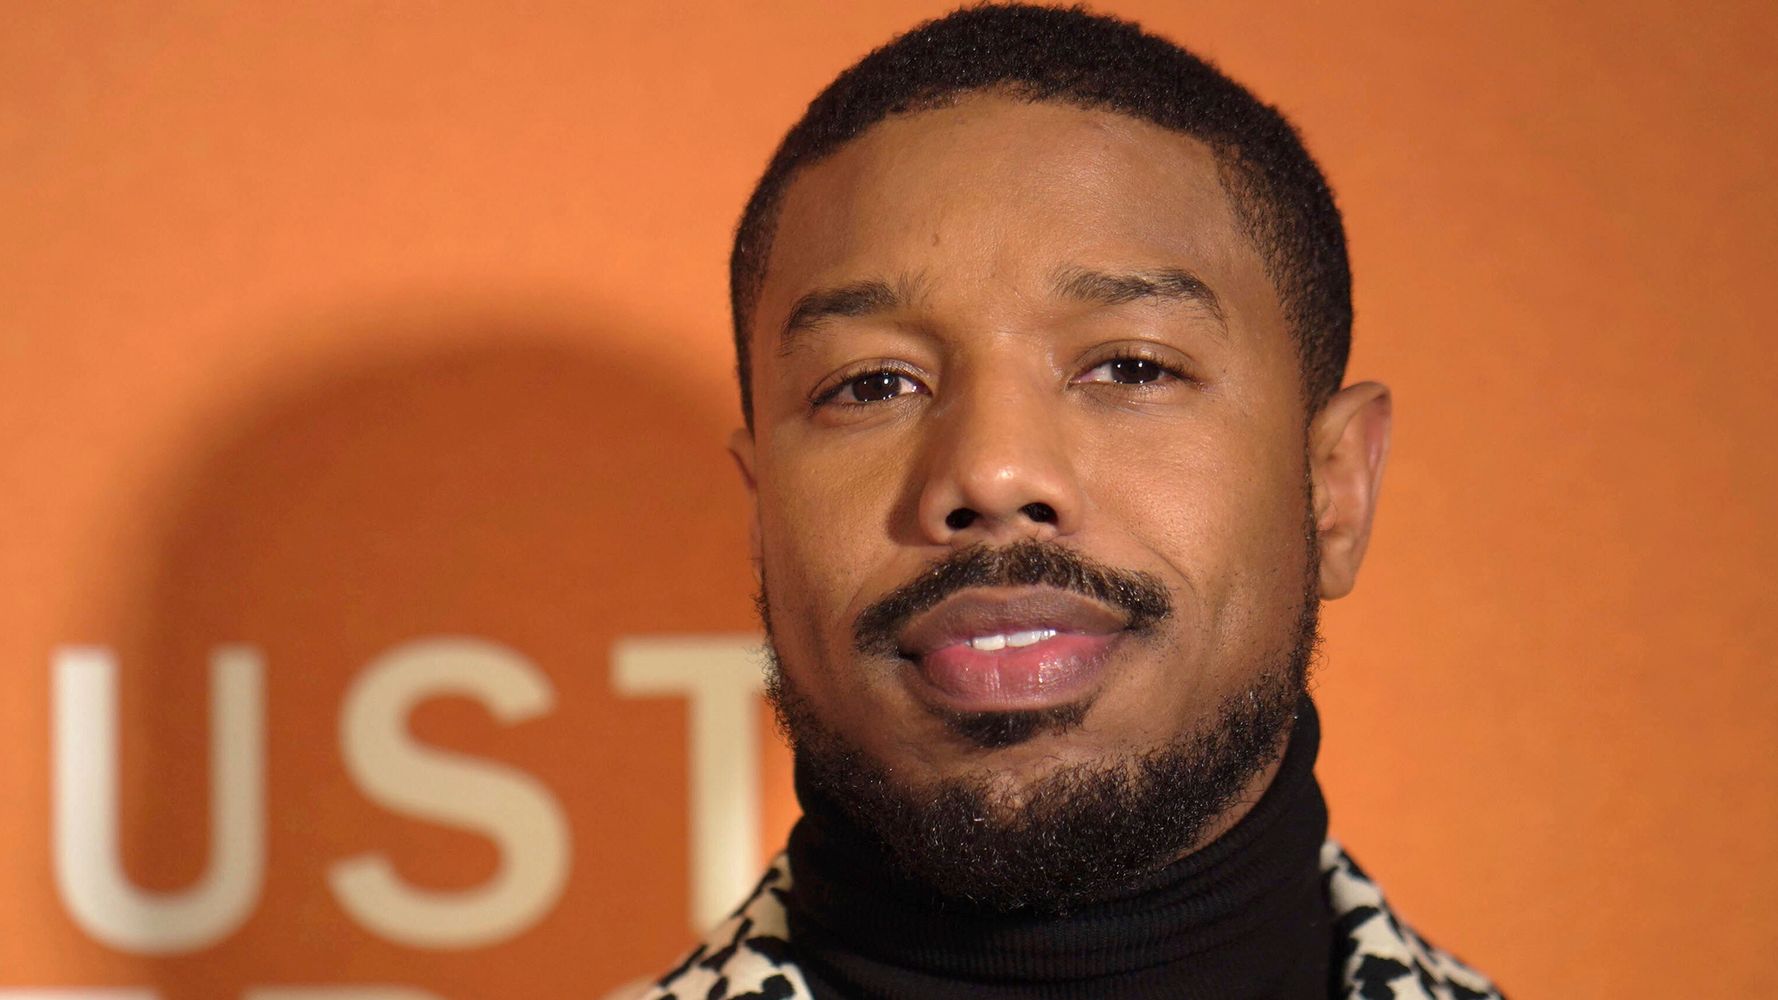 Michael B. Jordan Revealed As People's 'Sexiest Man Alive' In The Most 2020 Way